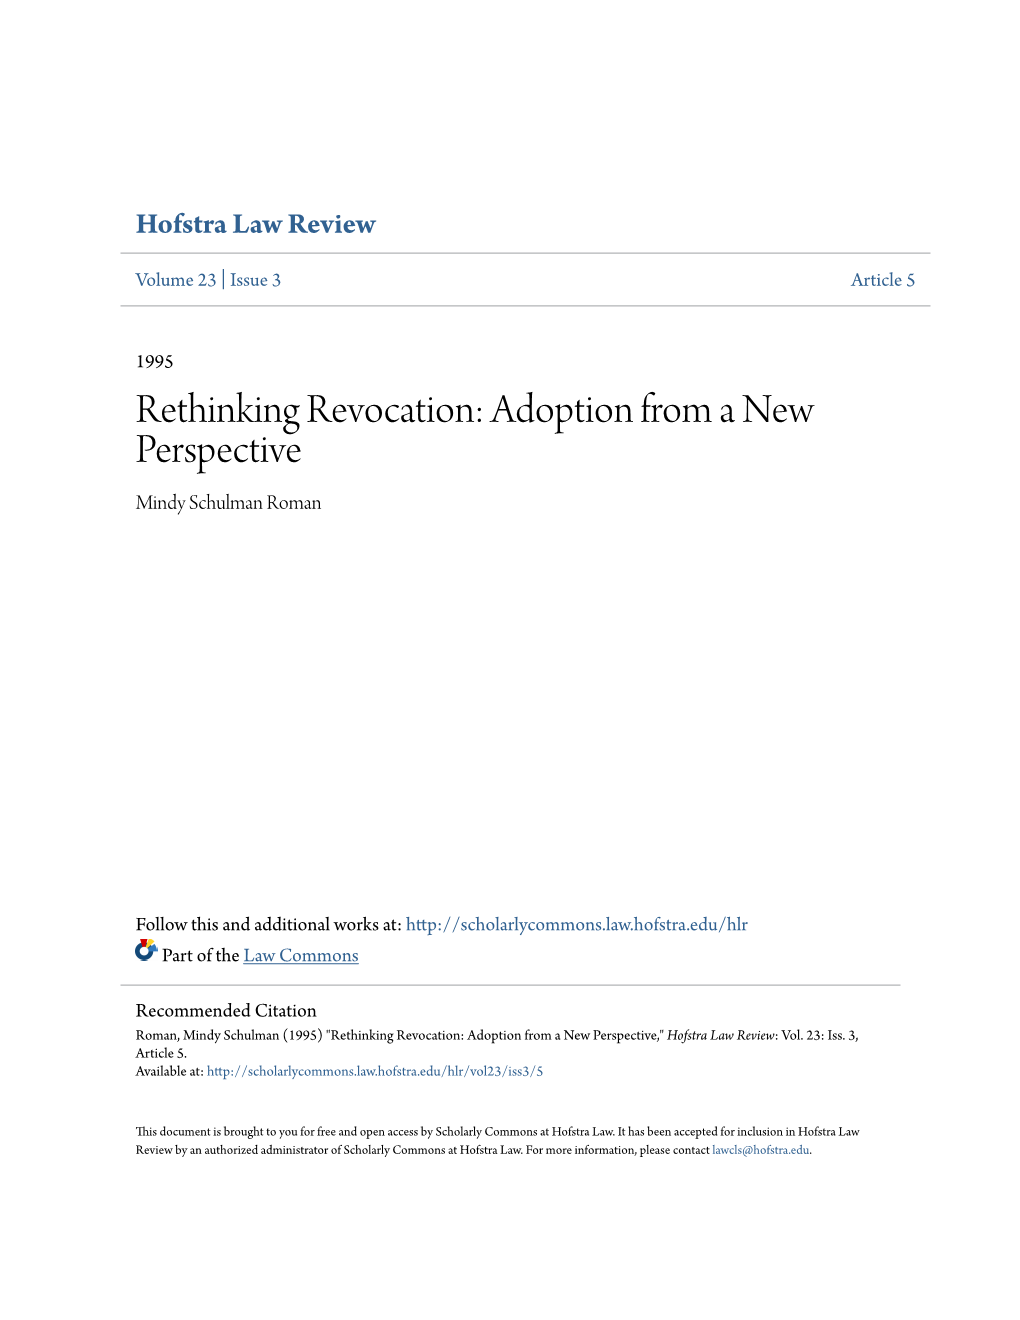 Adoption from a New Perspective Mindy Schulman Roman